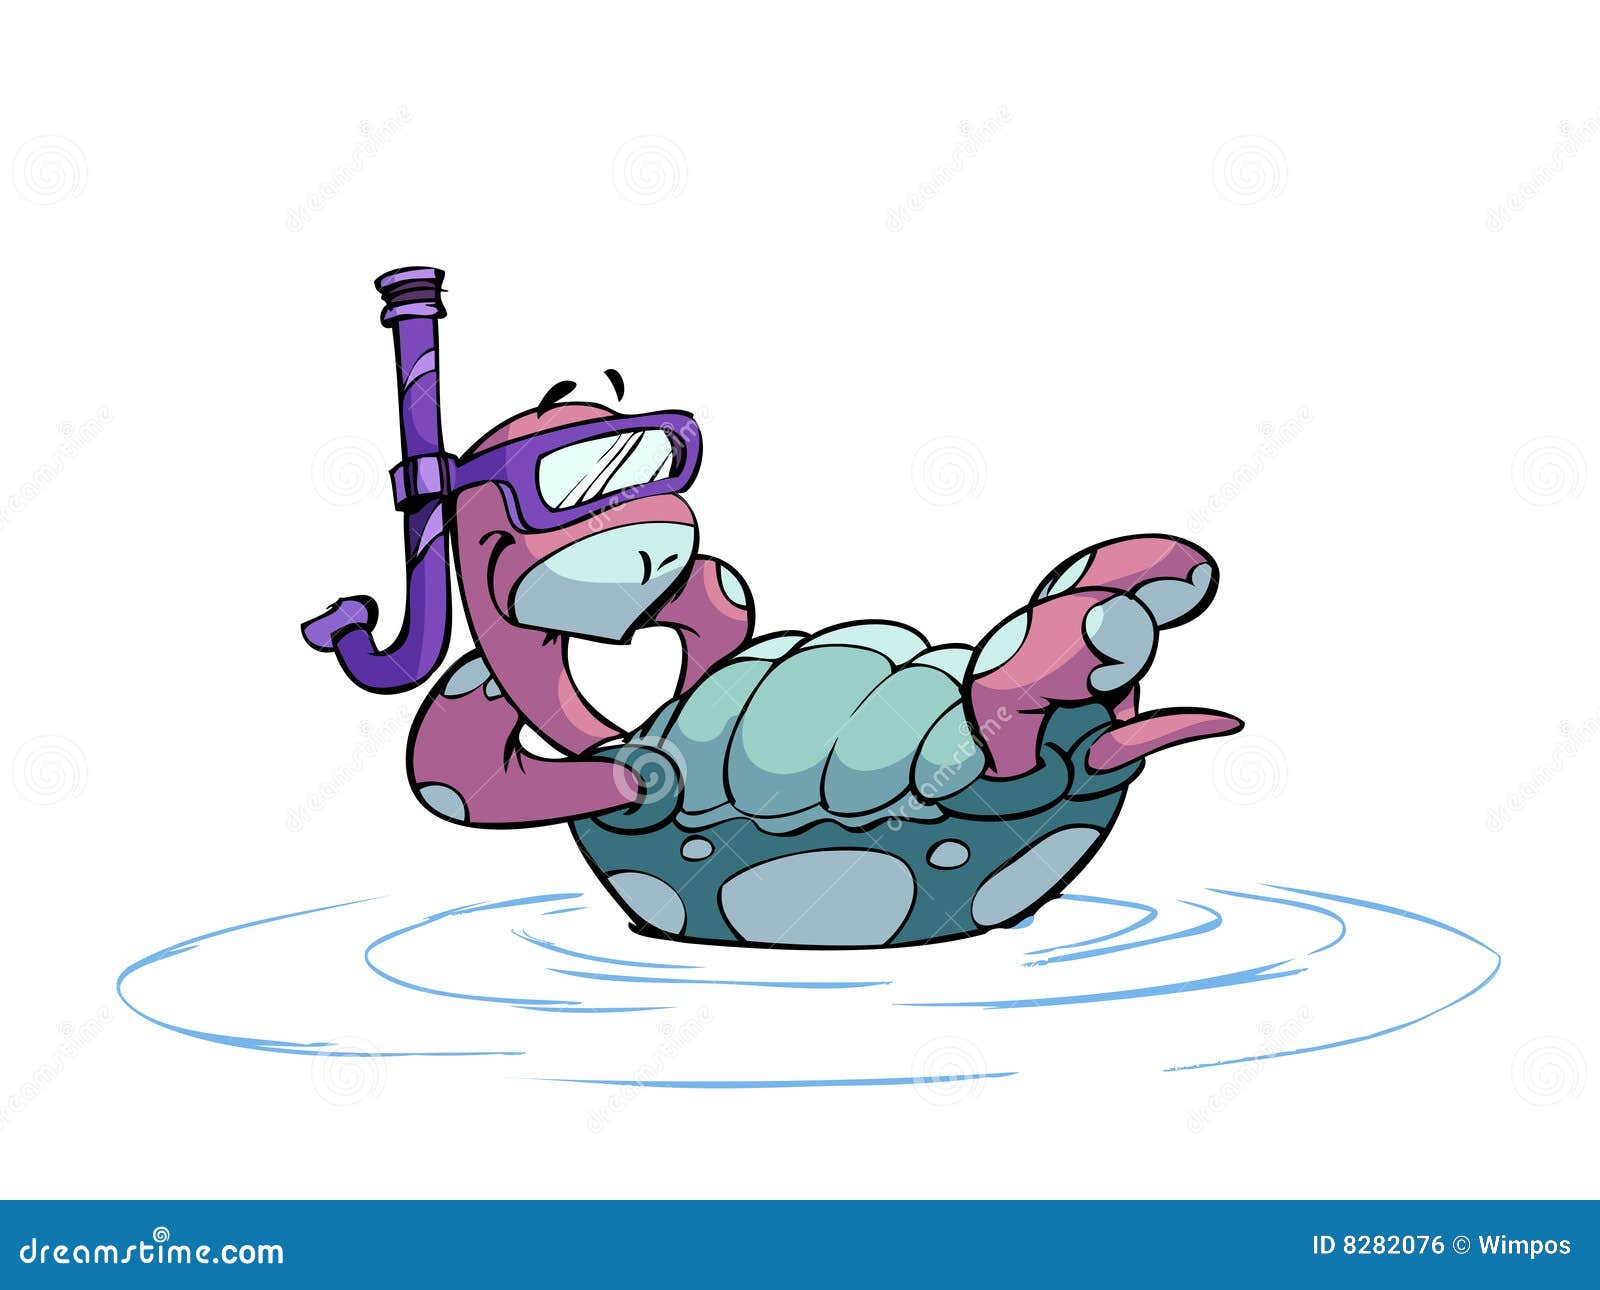 Swimming turtle. Cool sportive snorkling turtle in water